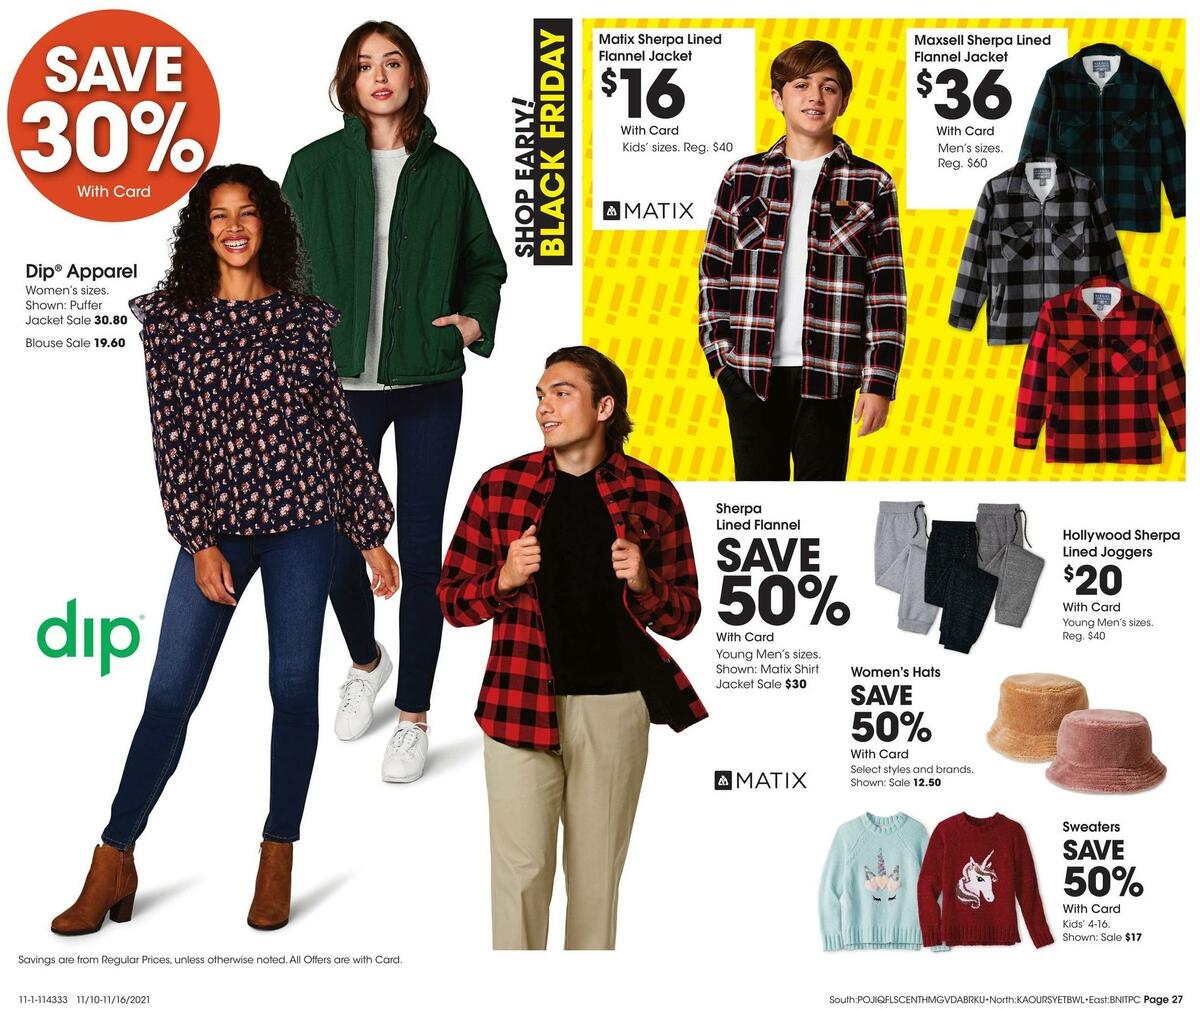 Fred Meyer General Merchandise Weekly Ad from November 10